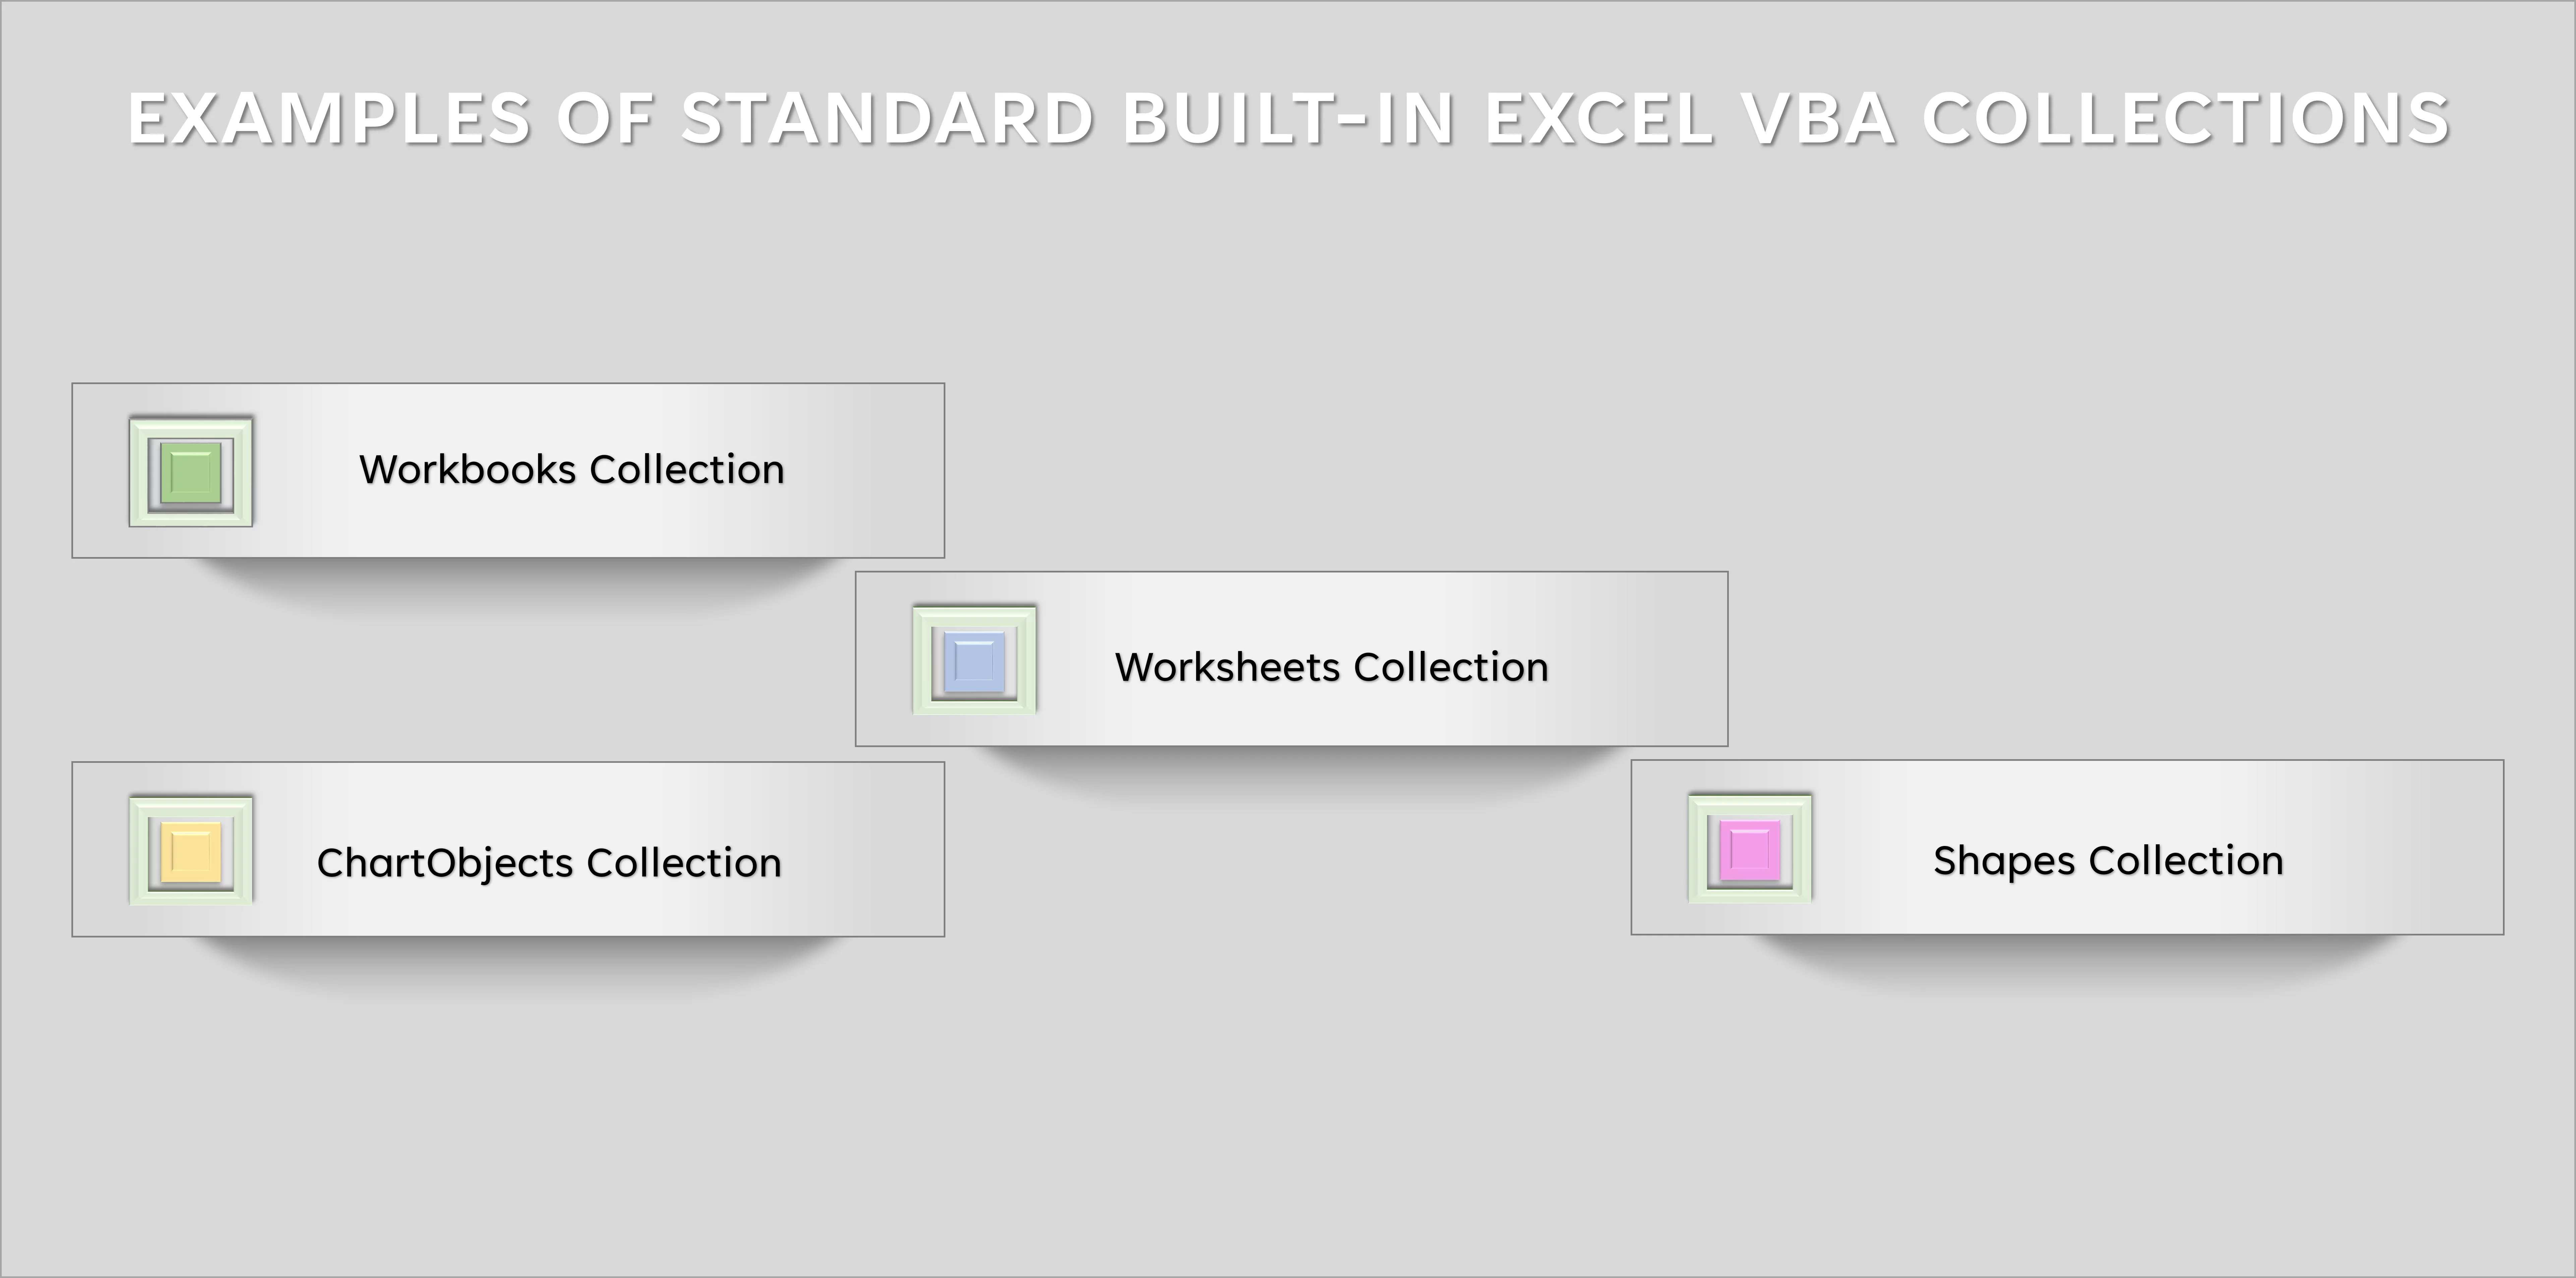 Graphic showing examples of the standard built-in Excel VBA Collections.